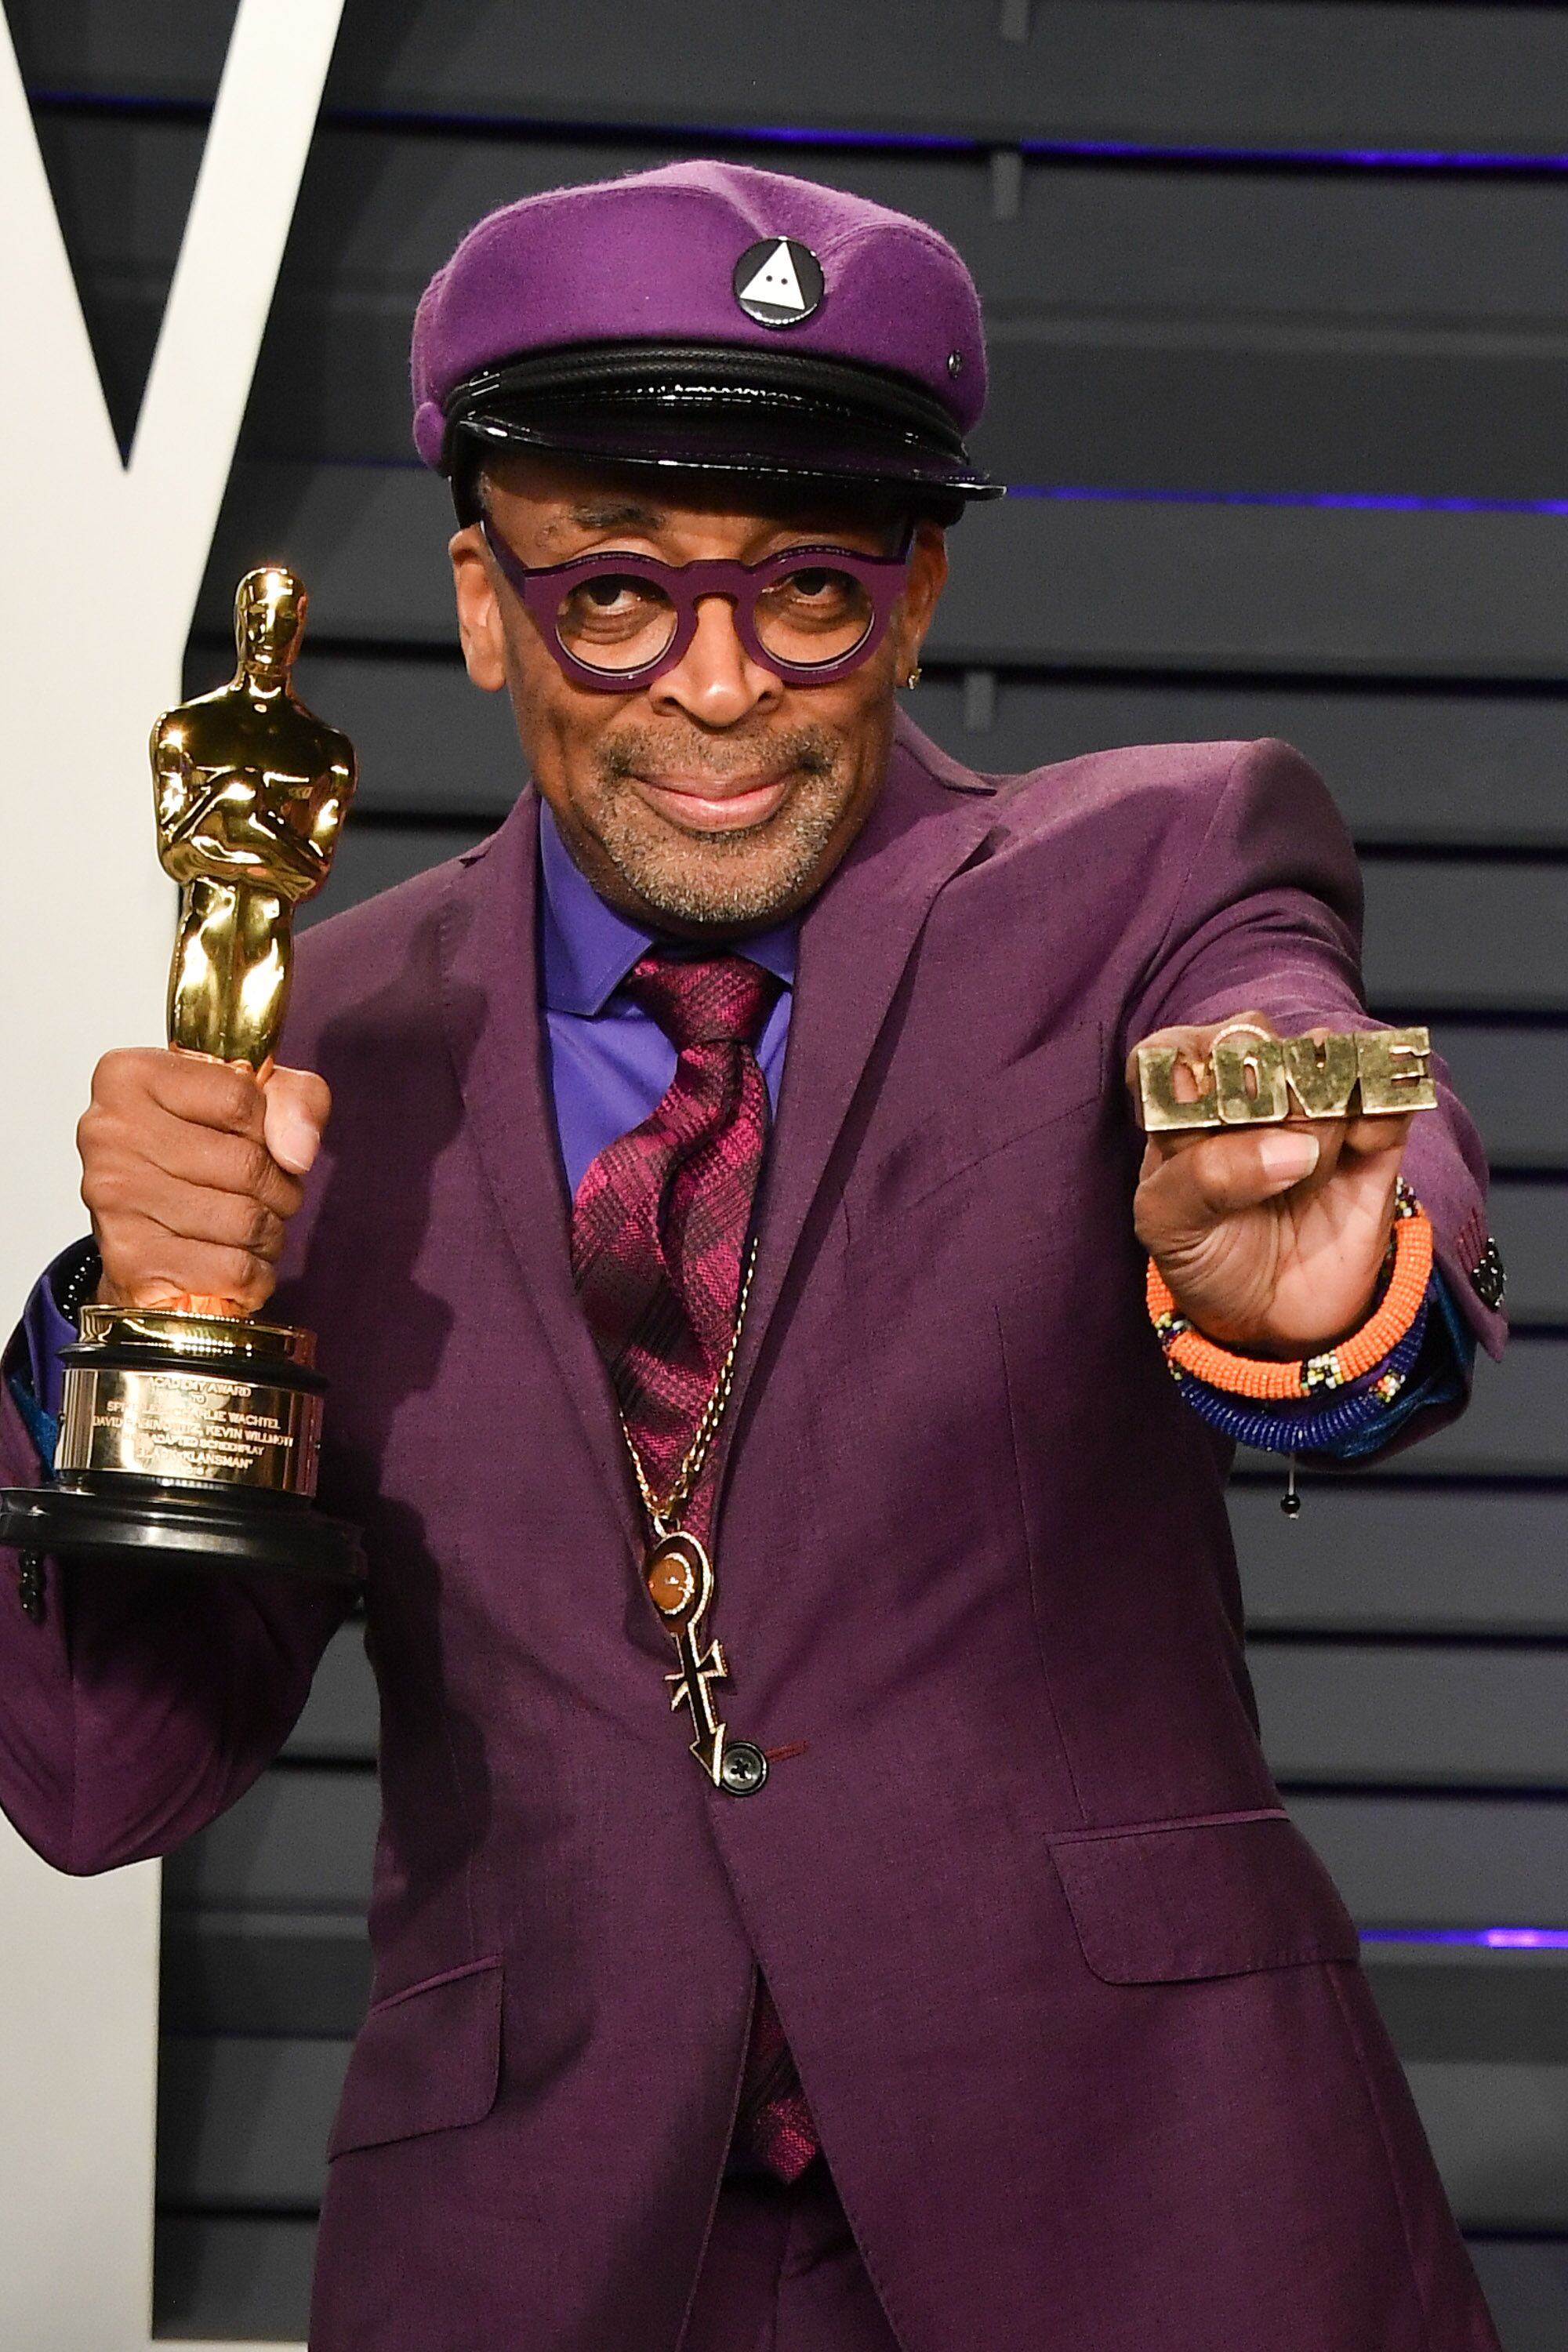 Spike Lee holding up his Oscar award for Best Director at the 2019 Academy Awards. | Photo: Getty Images